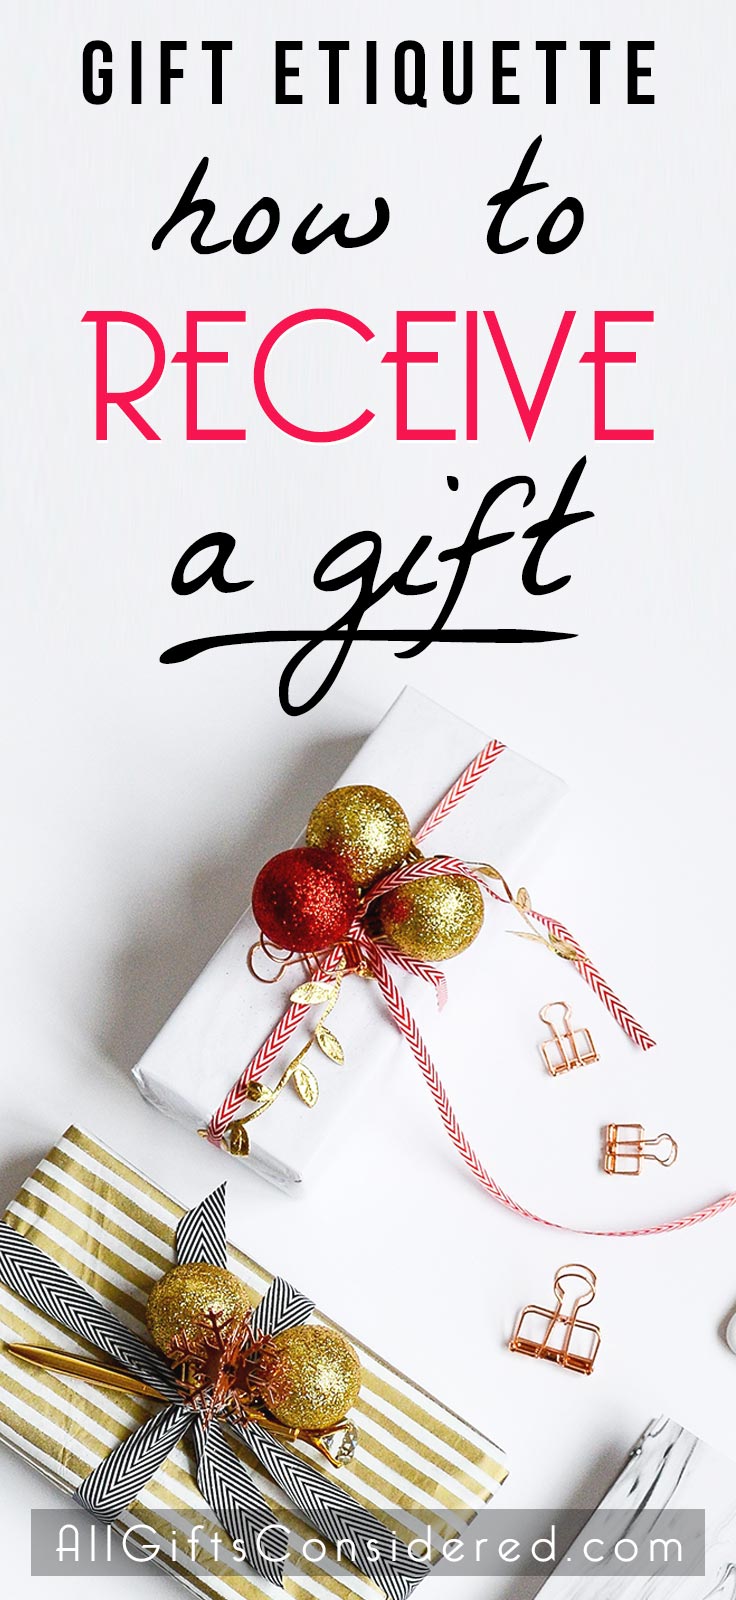 Gift etiquette for receiving a gift